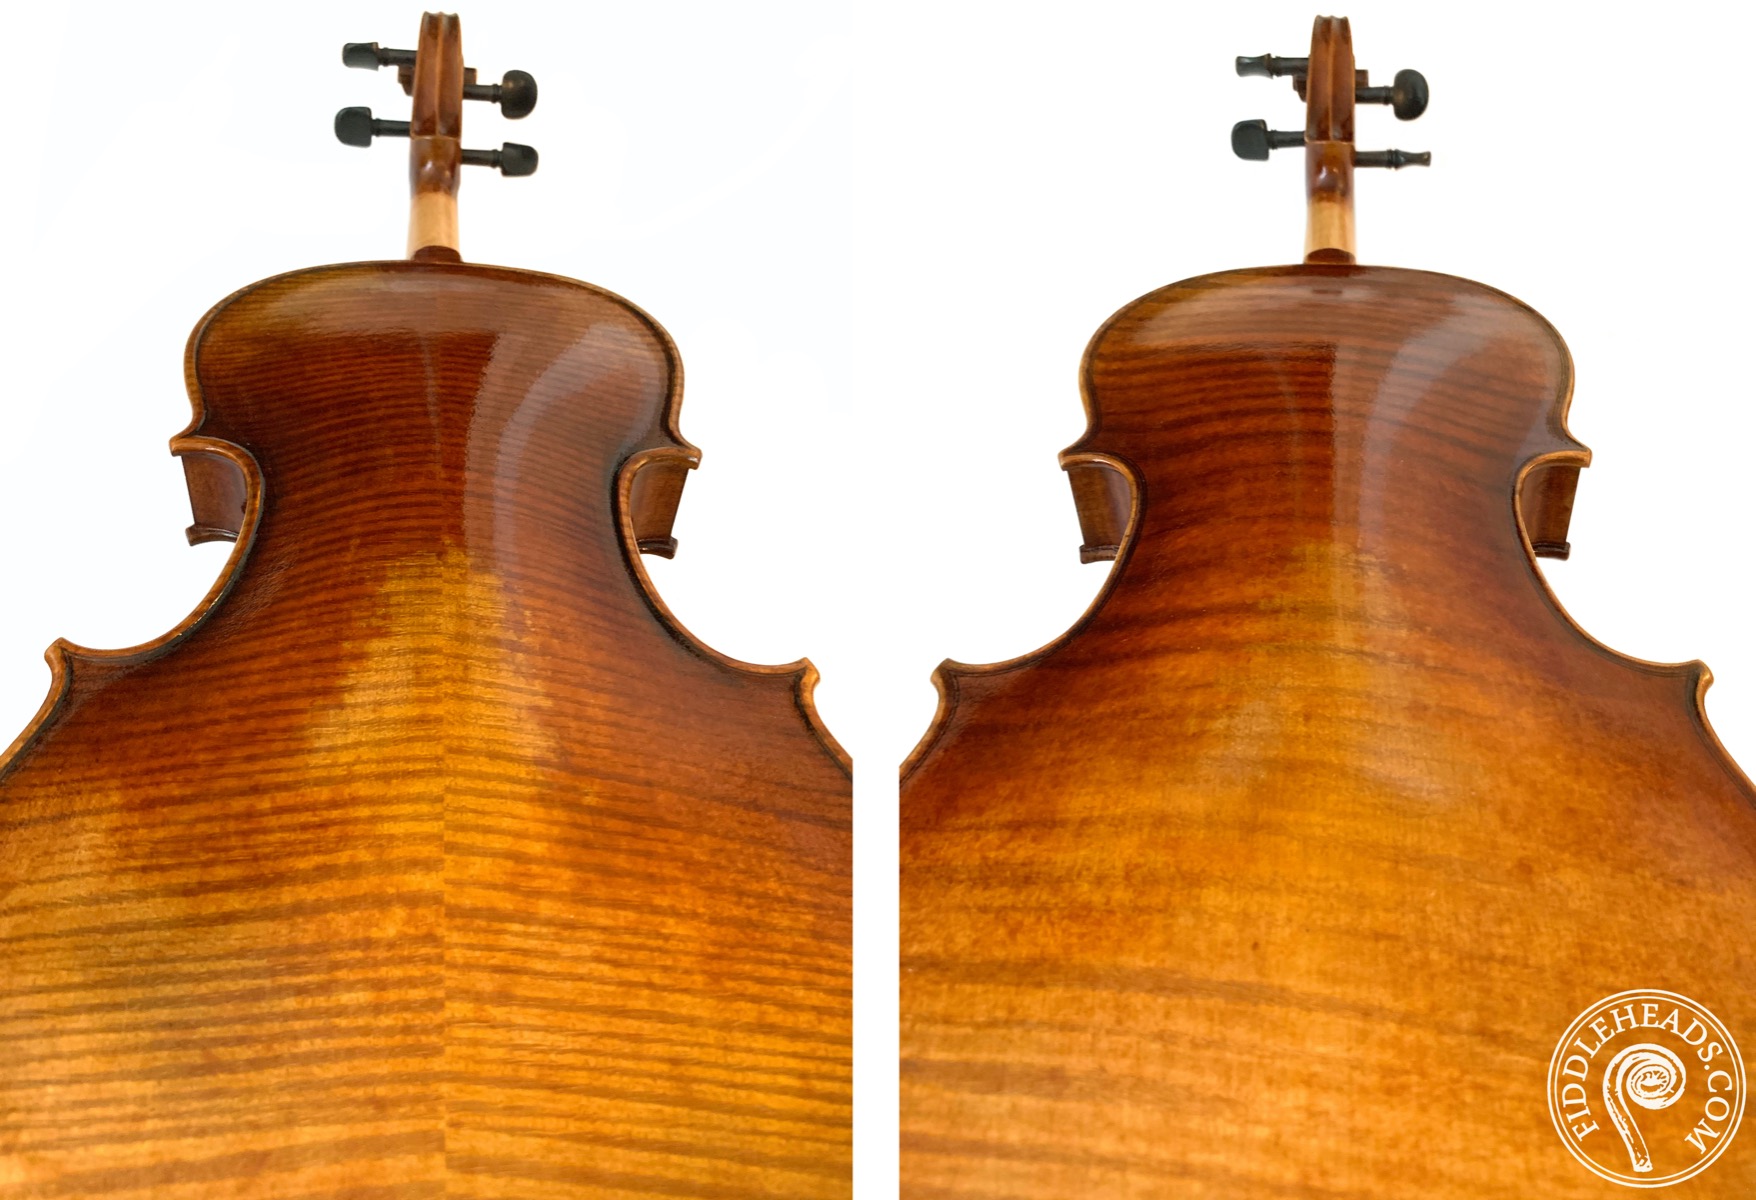 1- and 2-piece back violins